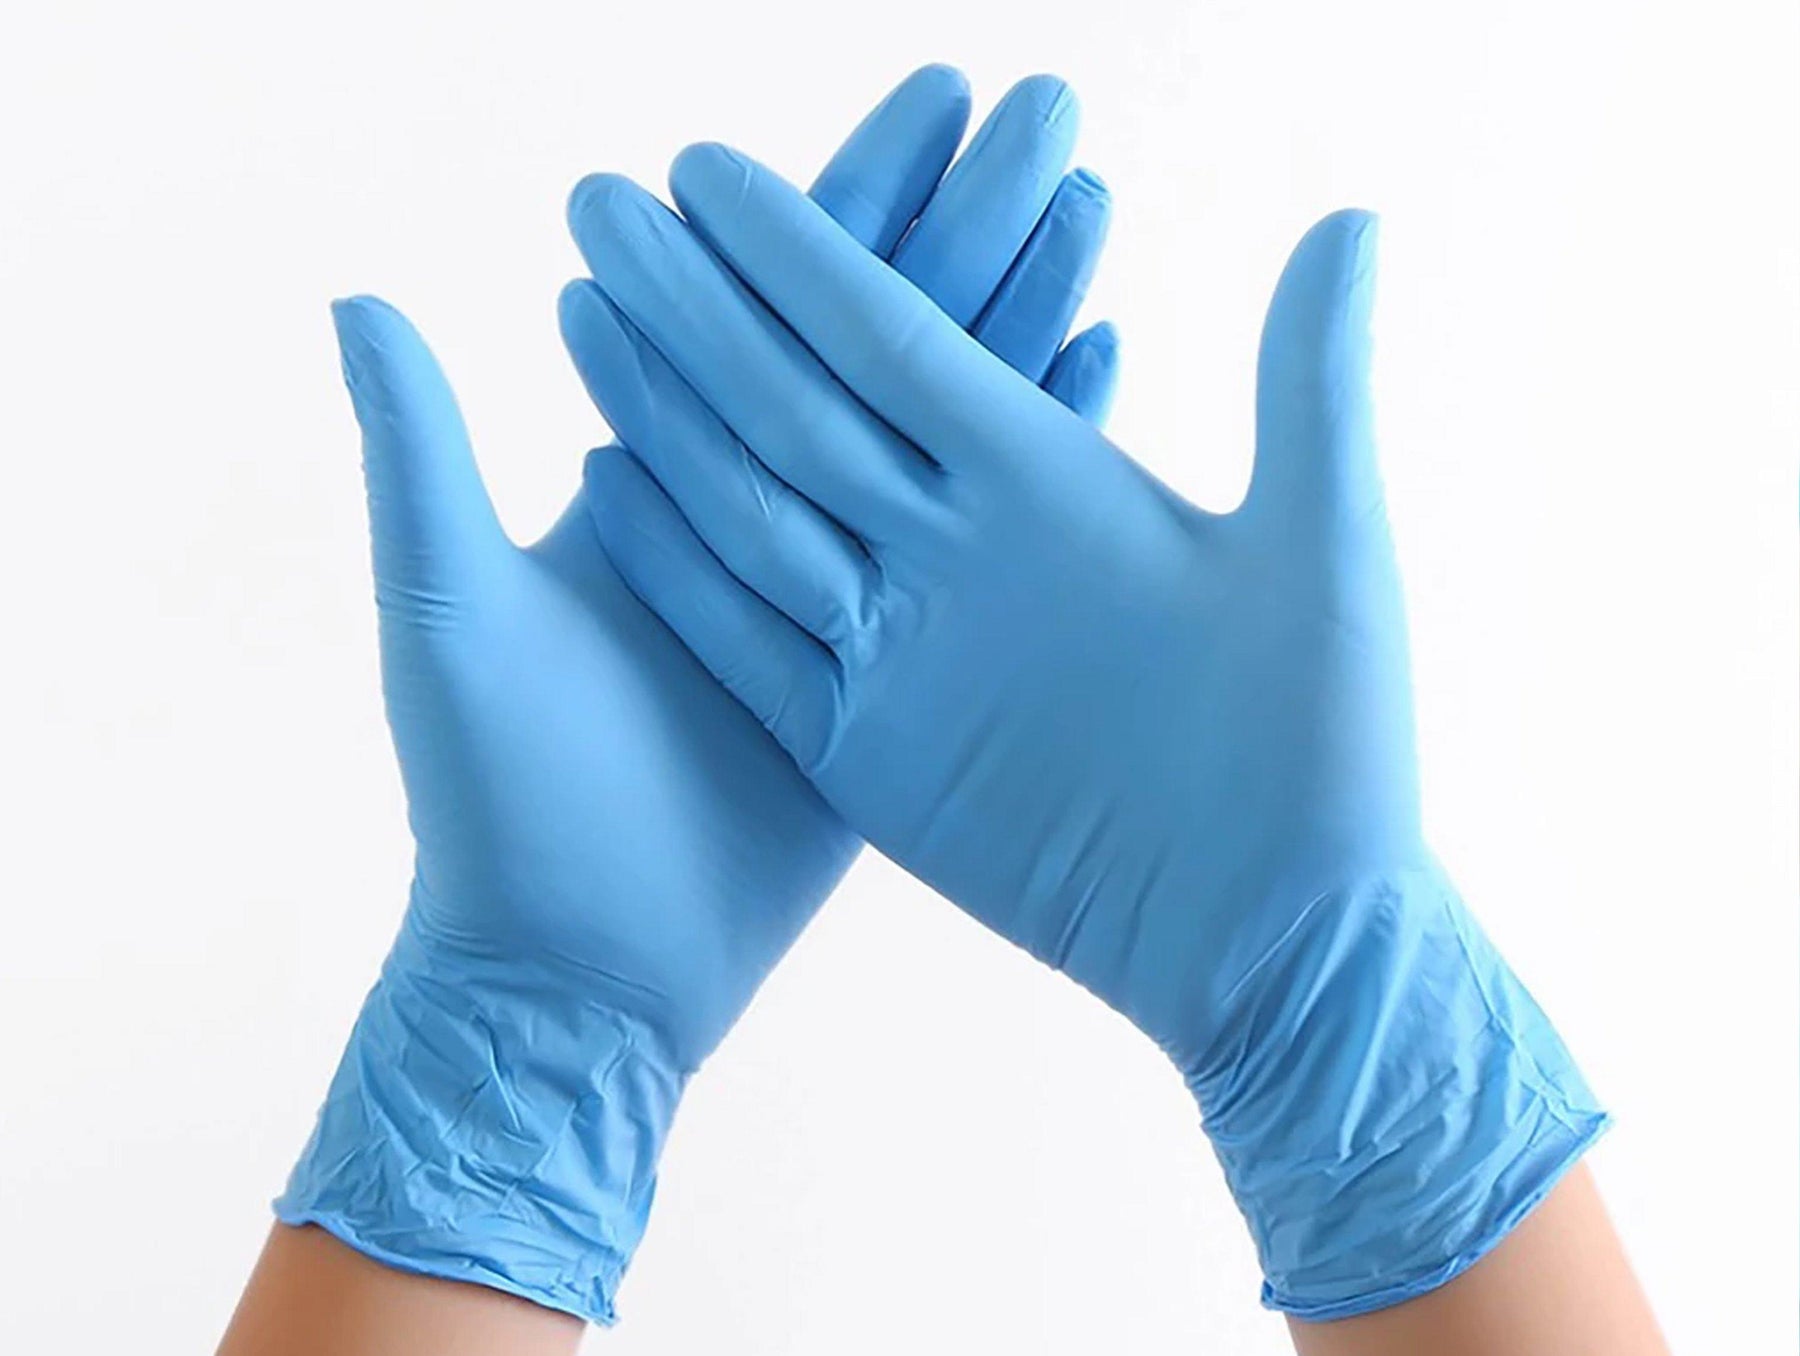 All You Need To Know When Buying the Right Gloves to Prevent the COVID-19 Spread